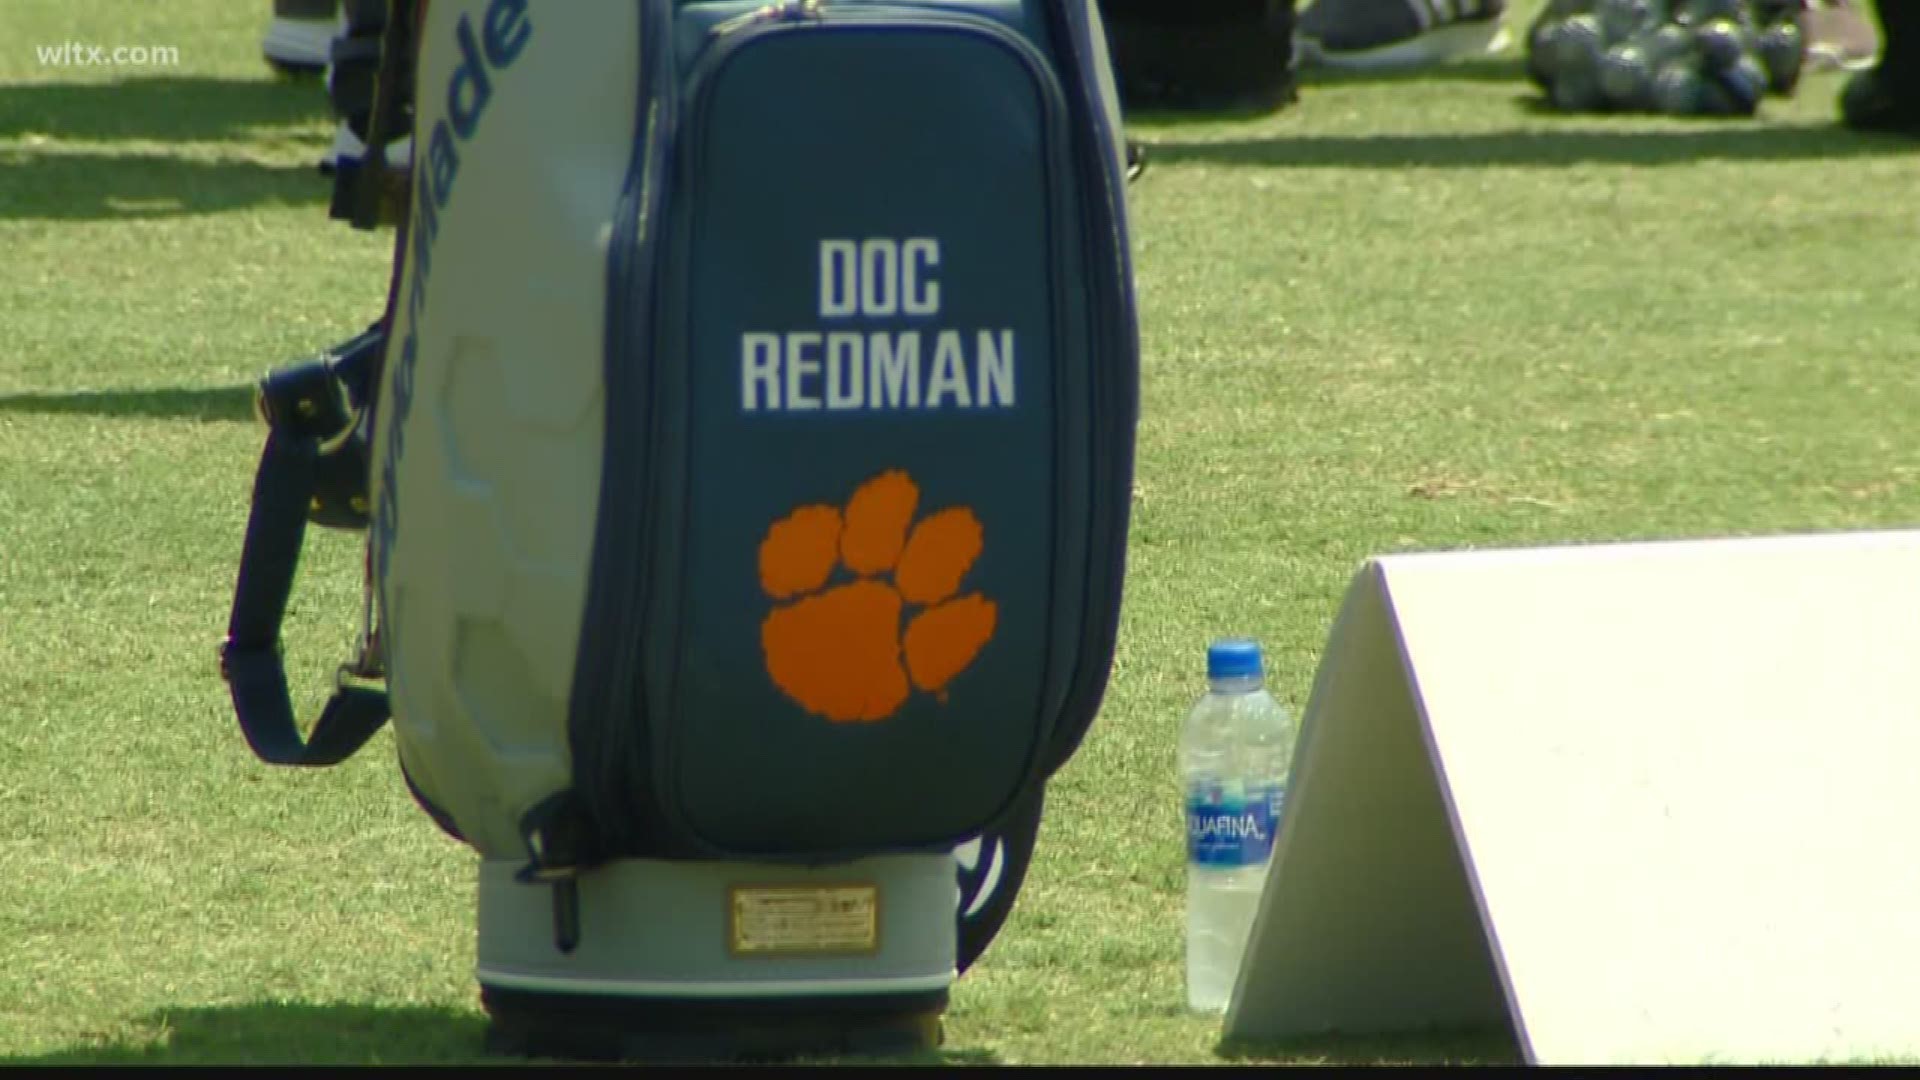 A native of Raleigh, Doc Redman will be teeing it up roughly 90 minutes from home in Greensboro at the Wyndham Championship.